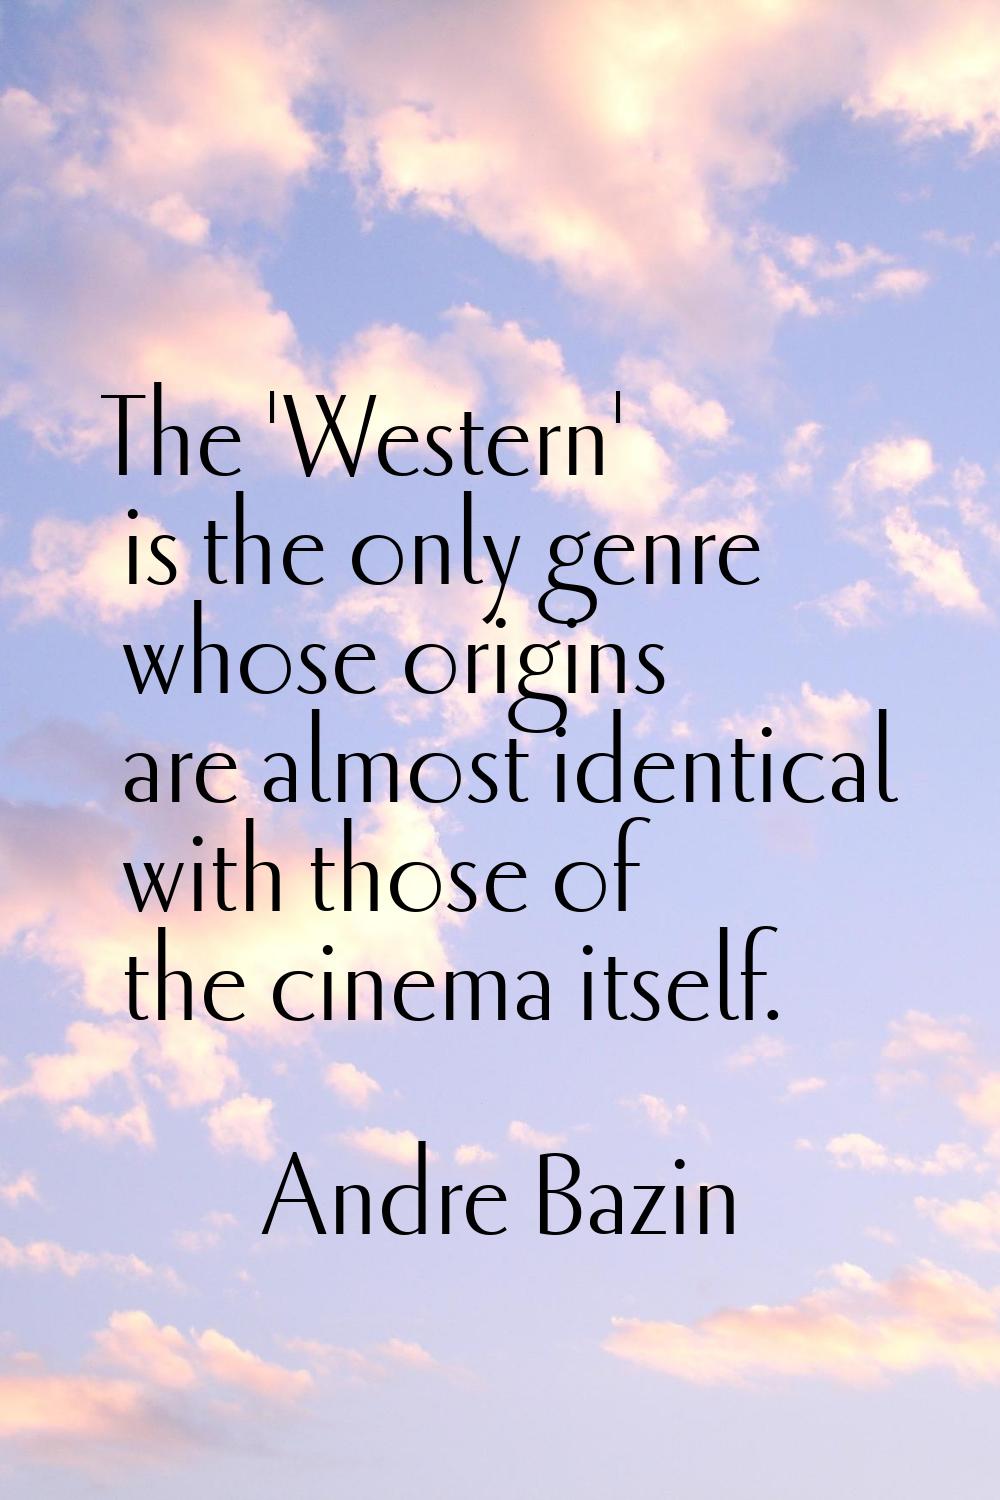 The 'Western' is the only genre whose origins are almost identical with those of the cinema itself.